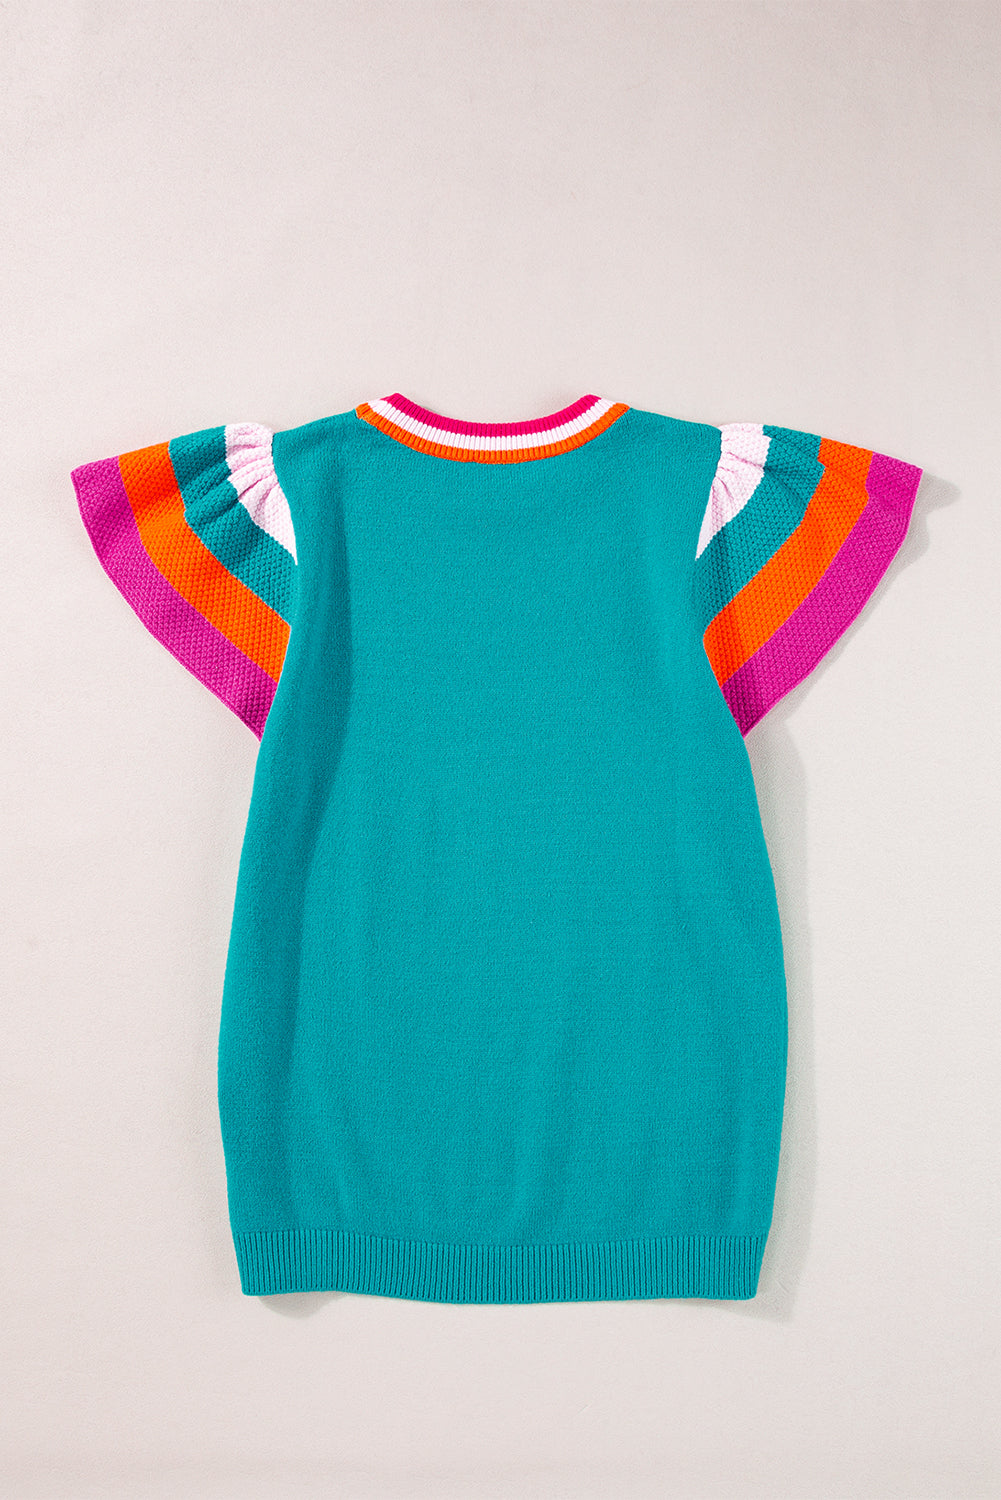 Carrot Contrast Color Striped Sleeve Knitted Tee